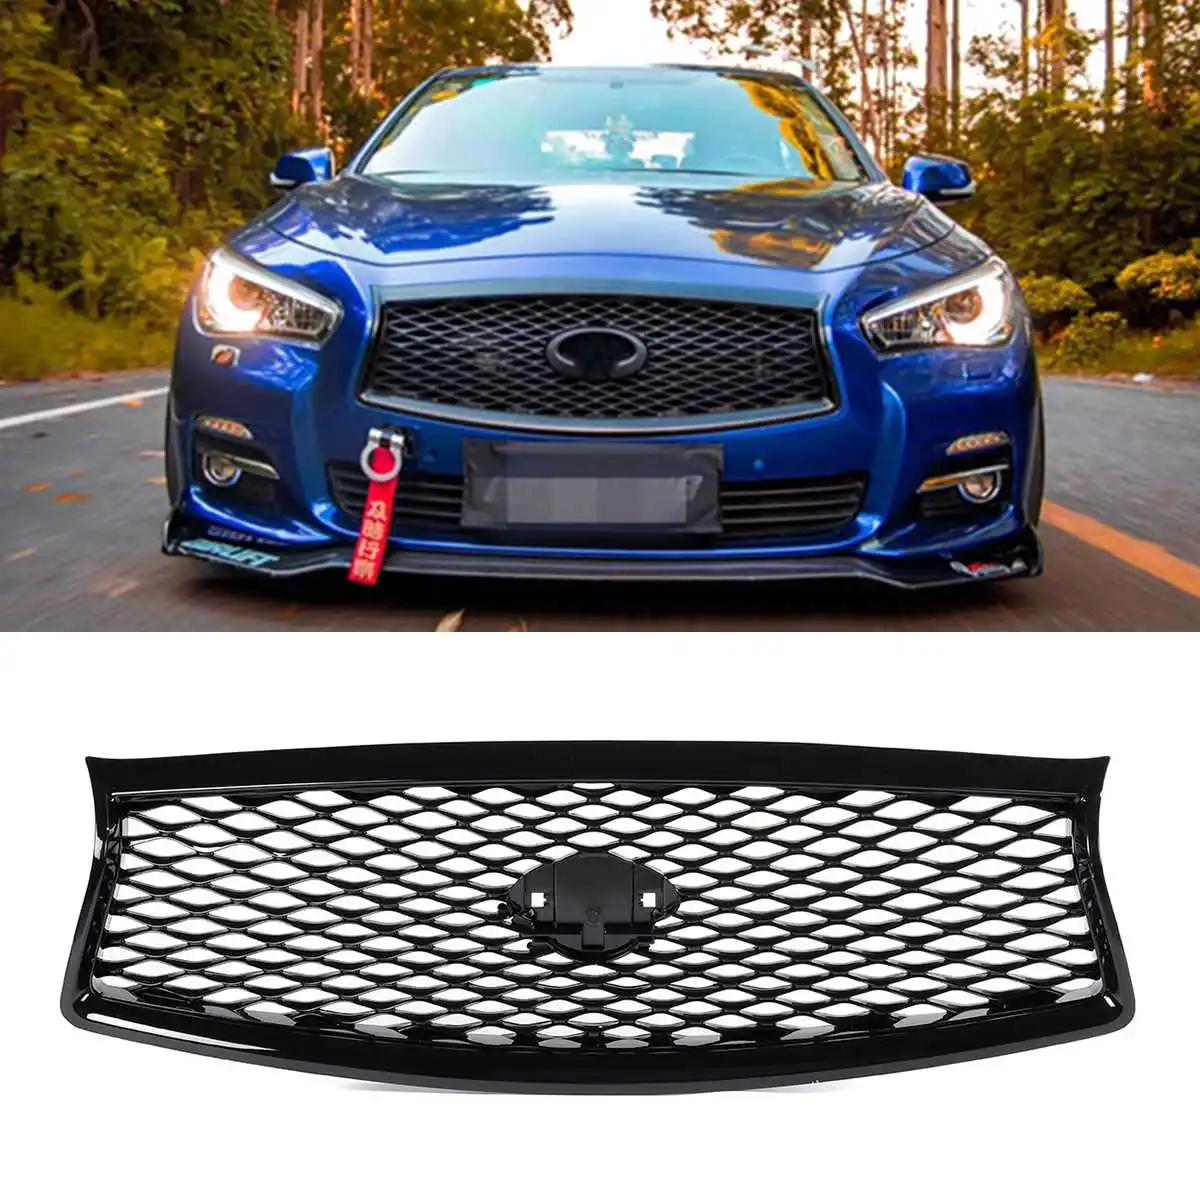 Front Black Upper Mesh Grille Fit For 2014-17 Infiniti Q50 All Model ABS